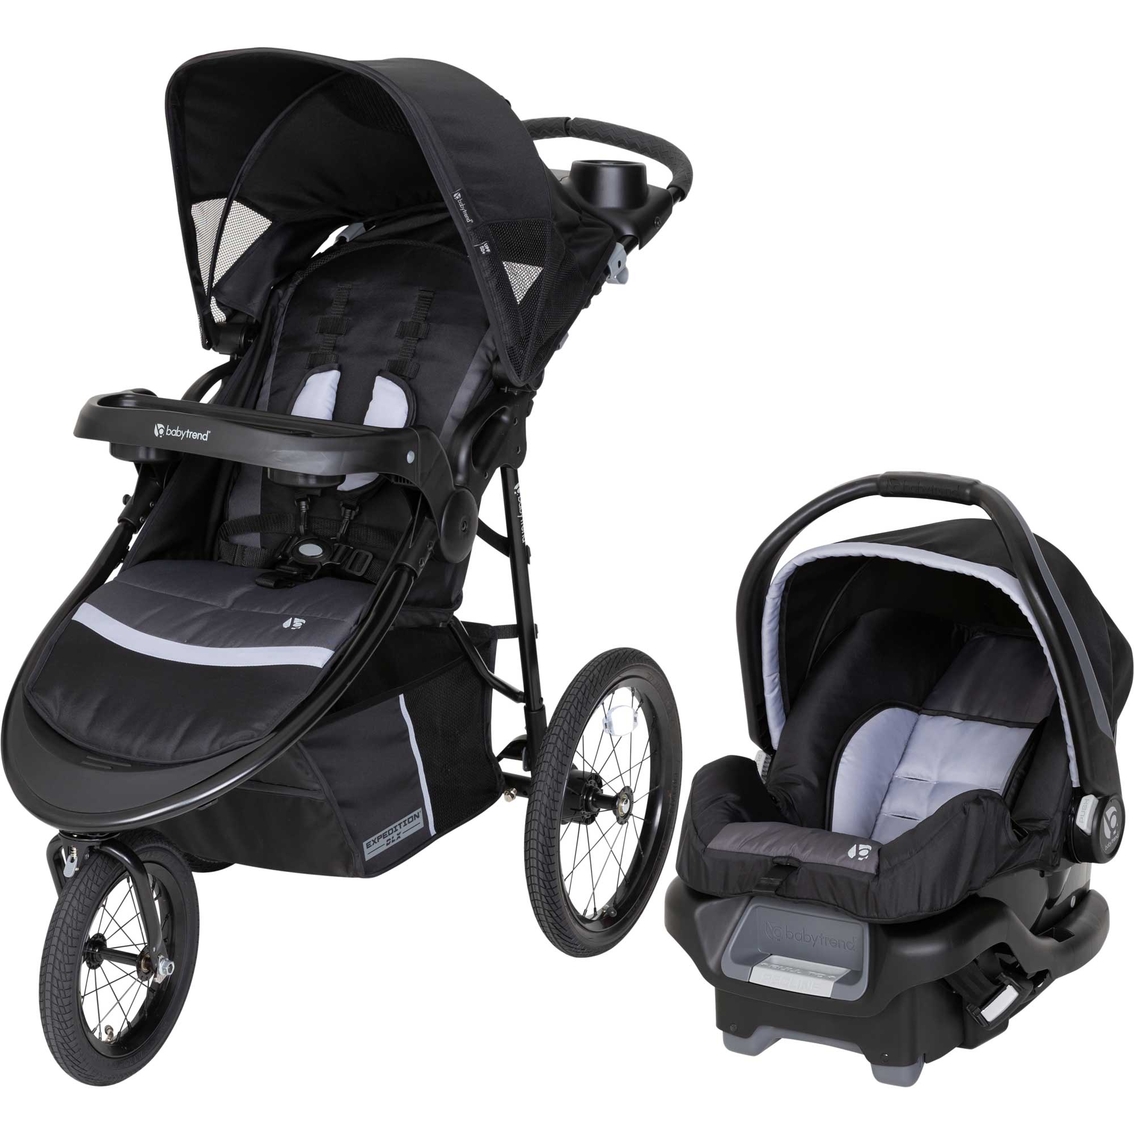 Baby Trend Jogger Travel System Stroller with Car Seat, Sports Gray